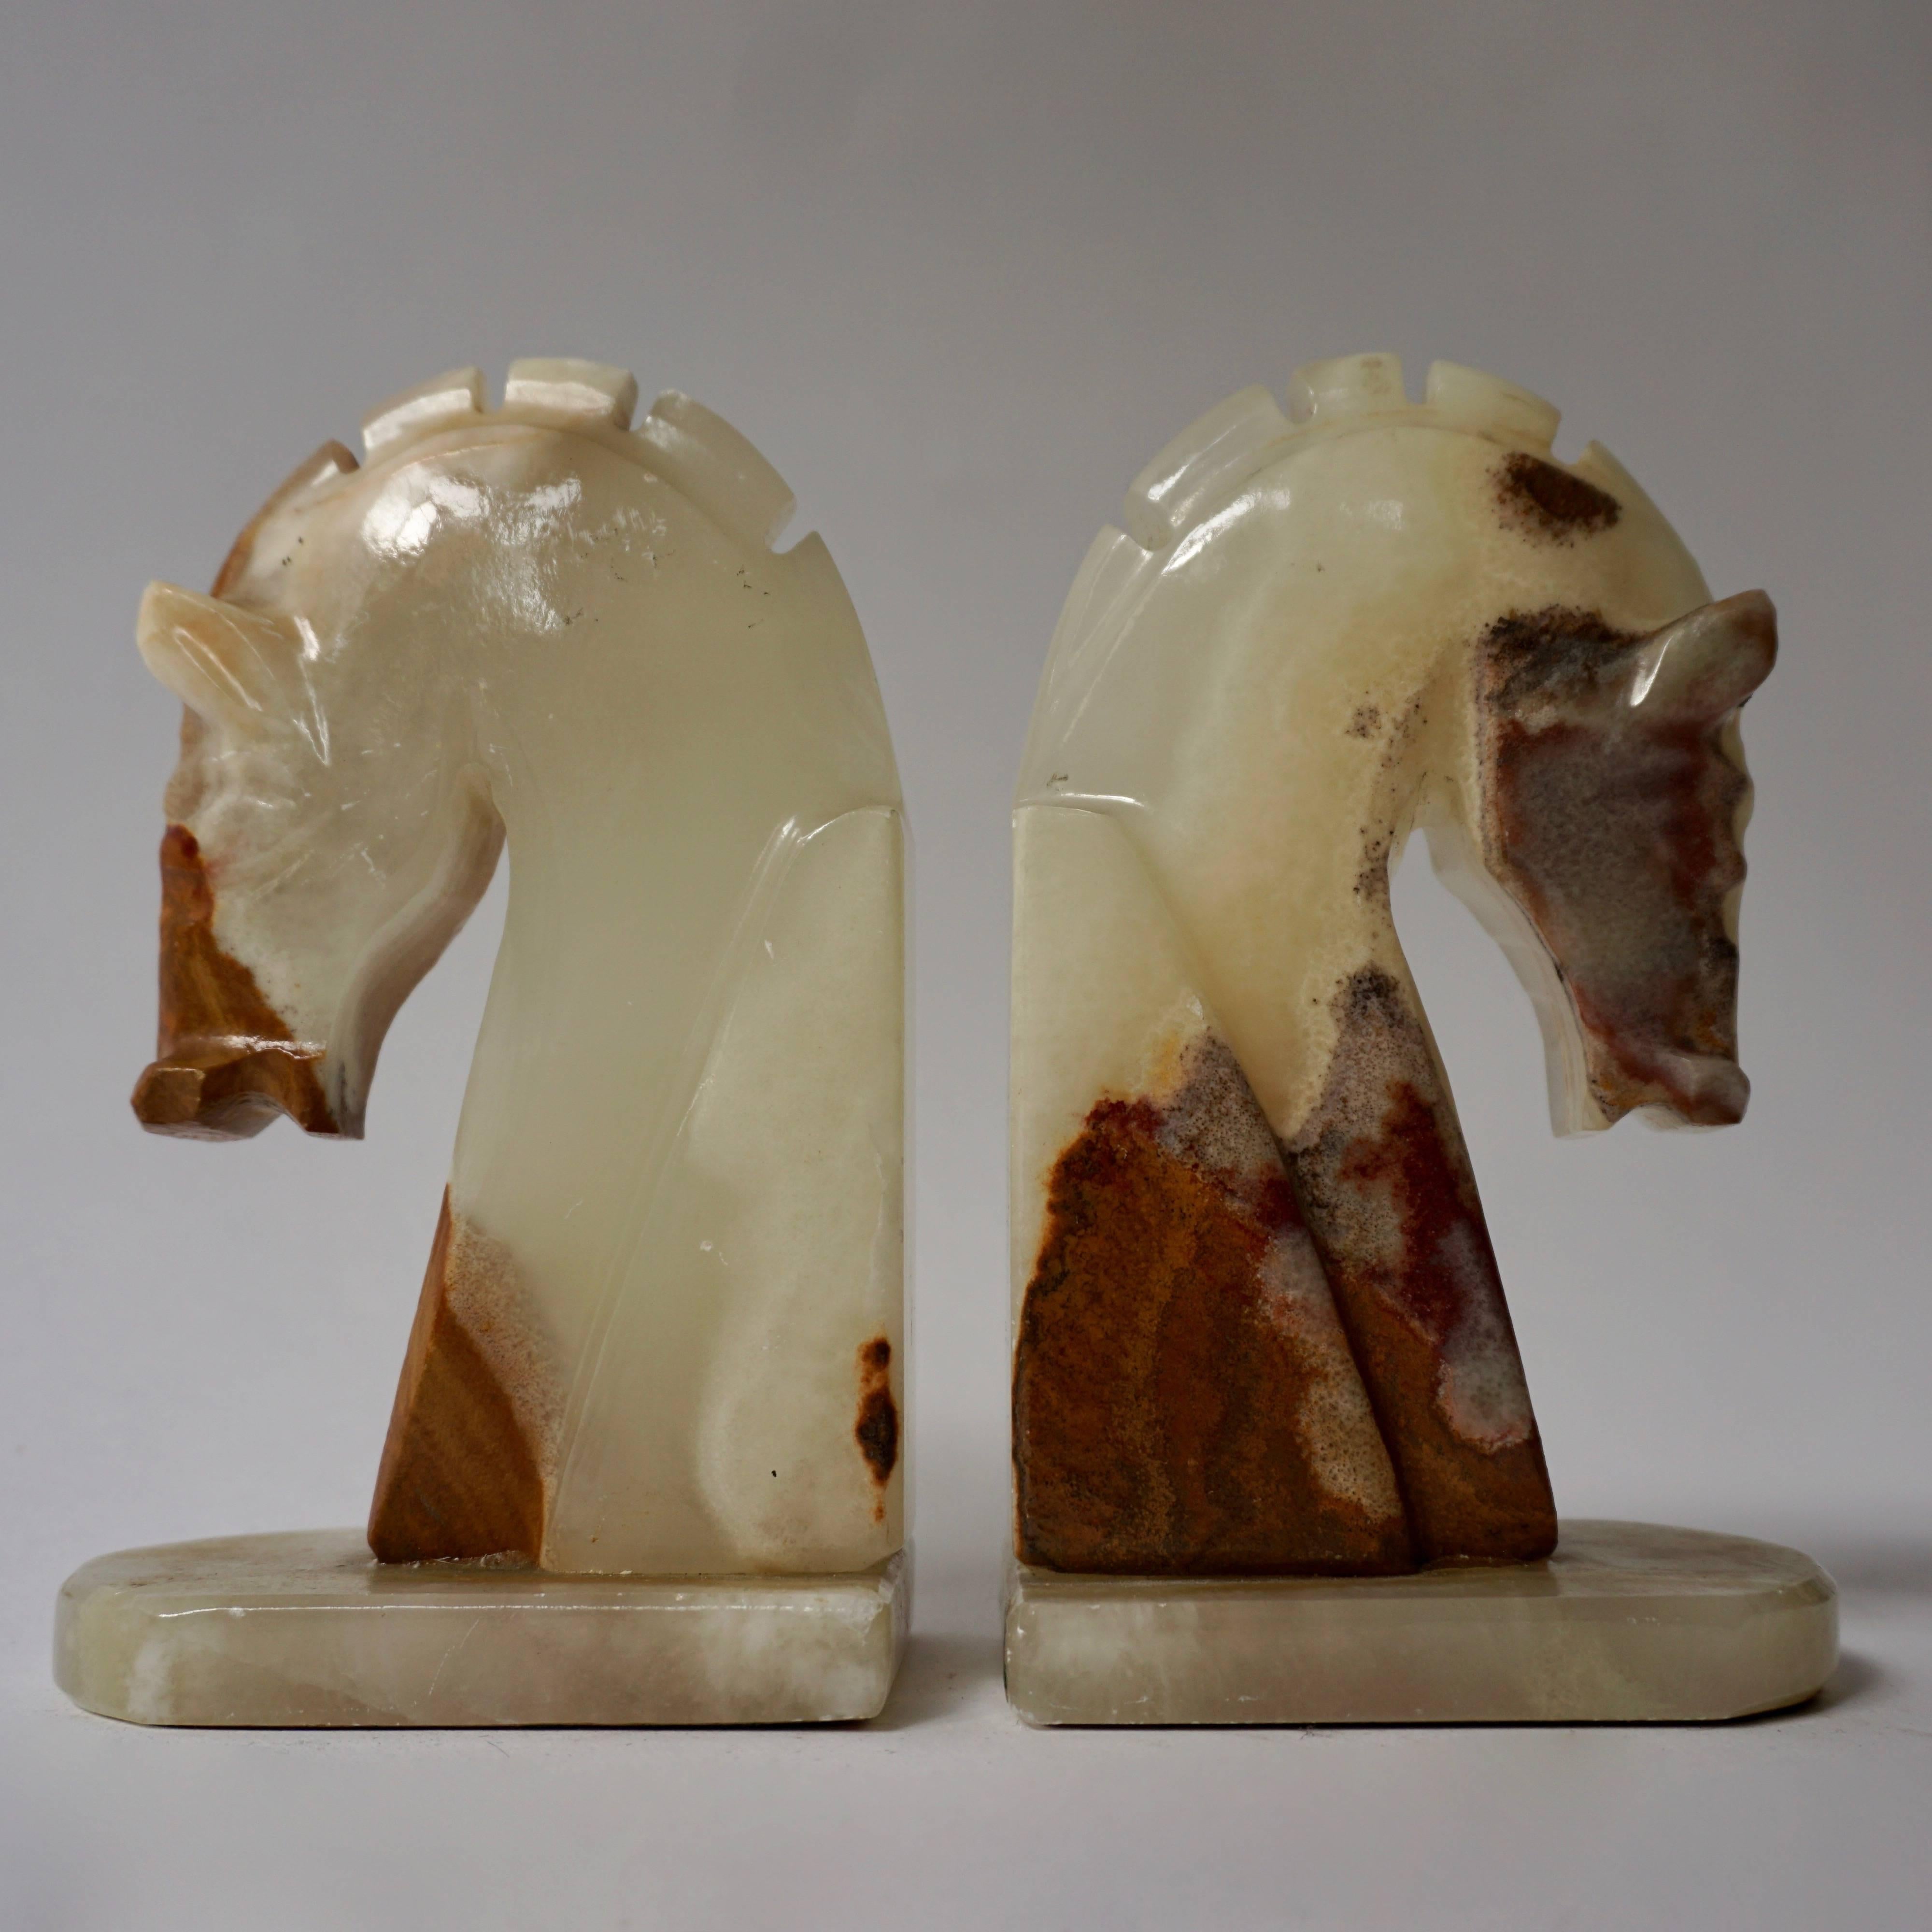 A beautiful and elegant pair of Art Deco hand-carved onyx horse head sculptural bookends with bowed head.
Italy, circa 1940s.